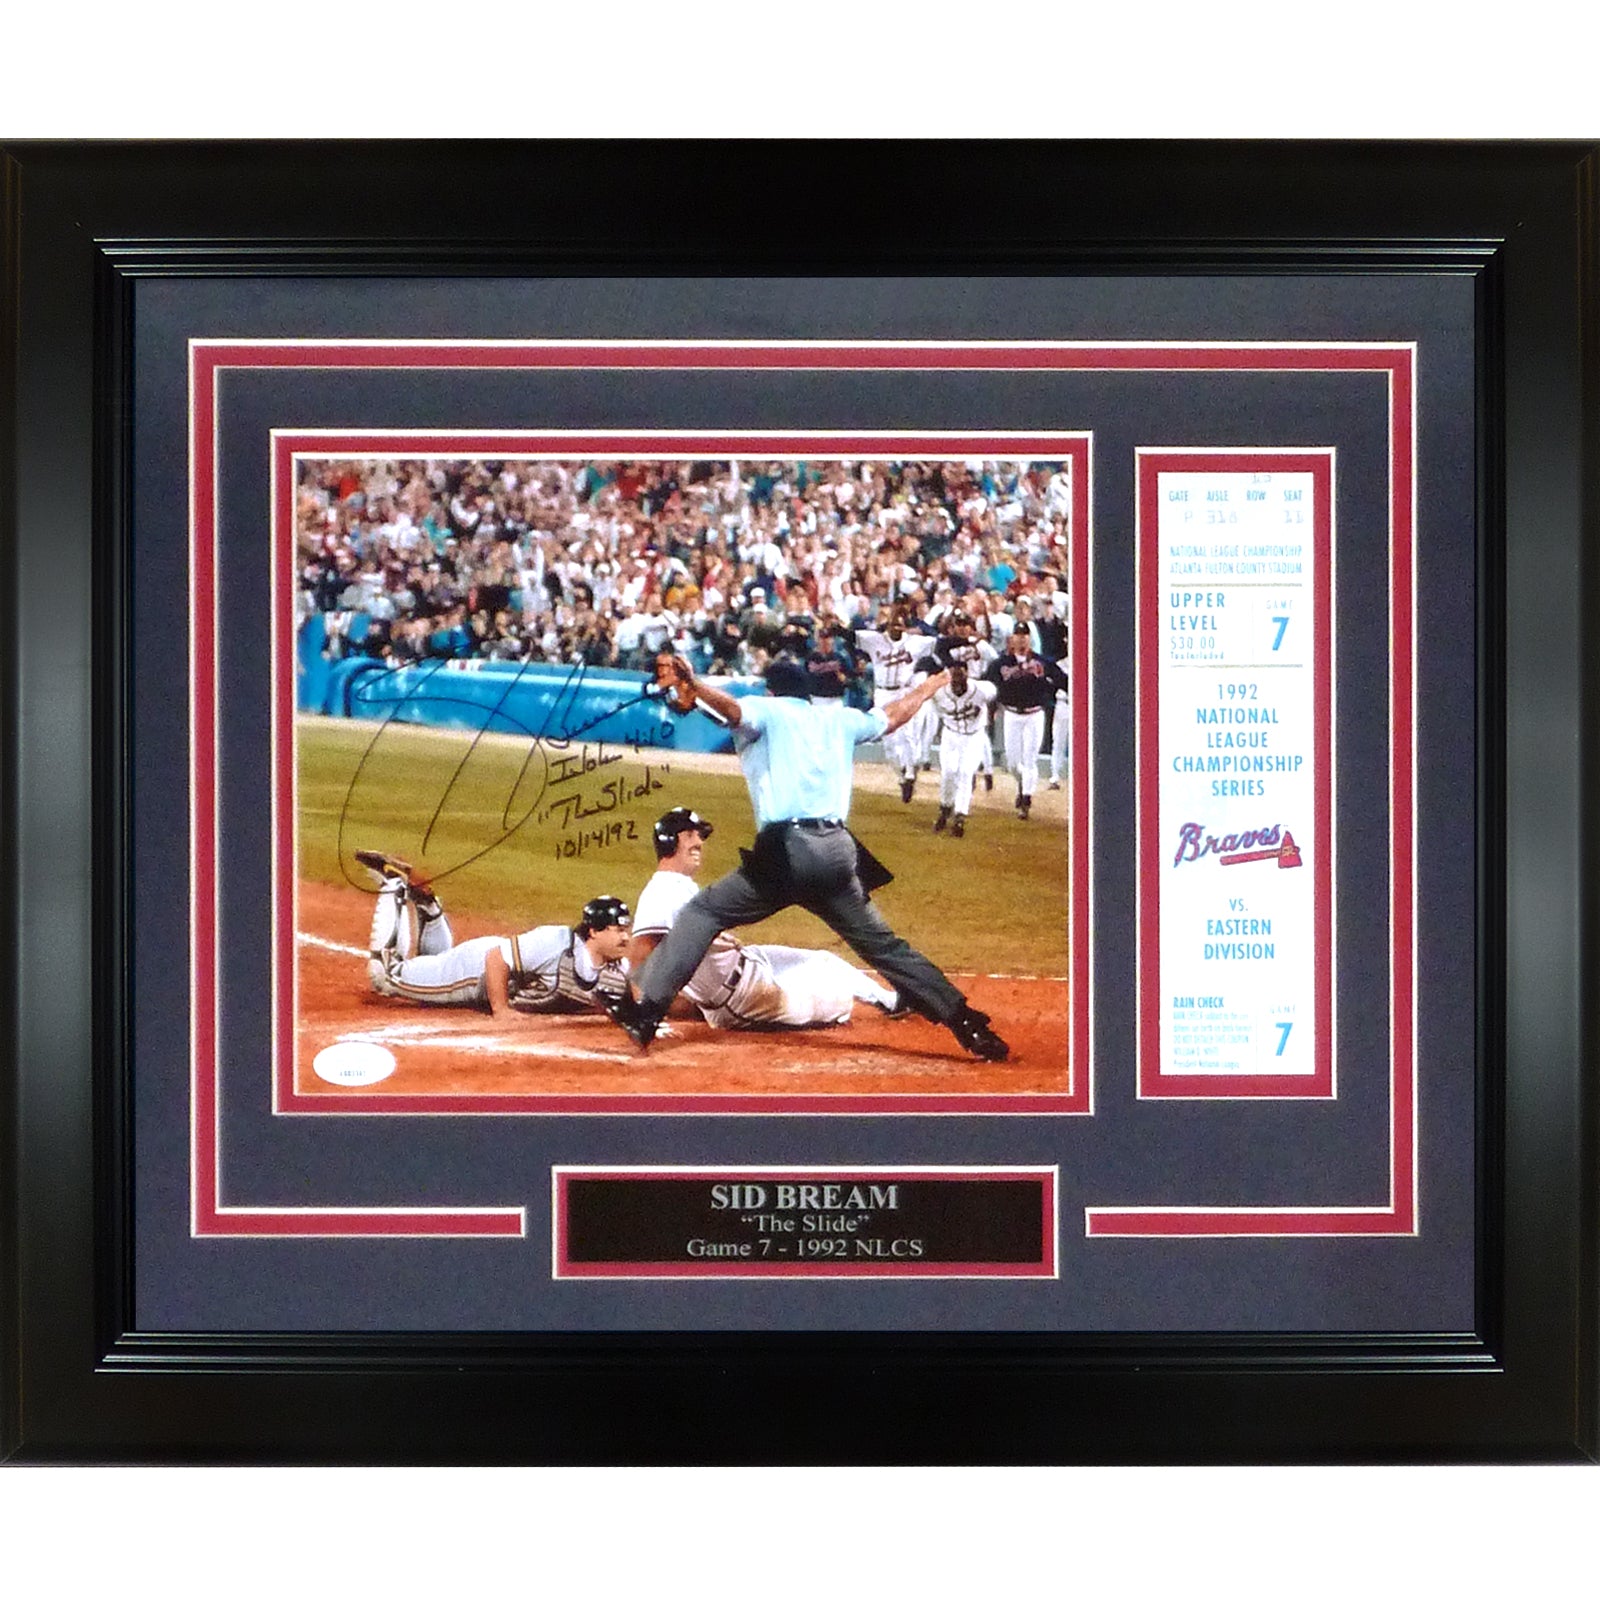 Sid Bream Autographed Atlanta Braves (NLCS Slide) Deluxe Framed 8x10 Photo with Replica Ticket Stub - JSA